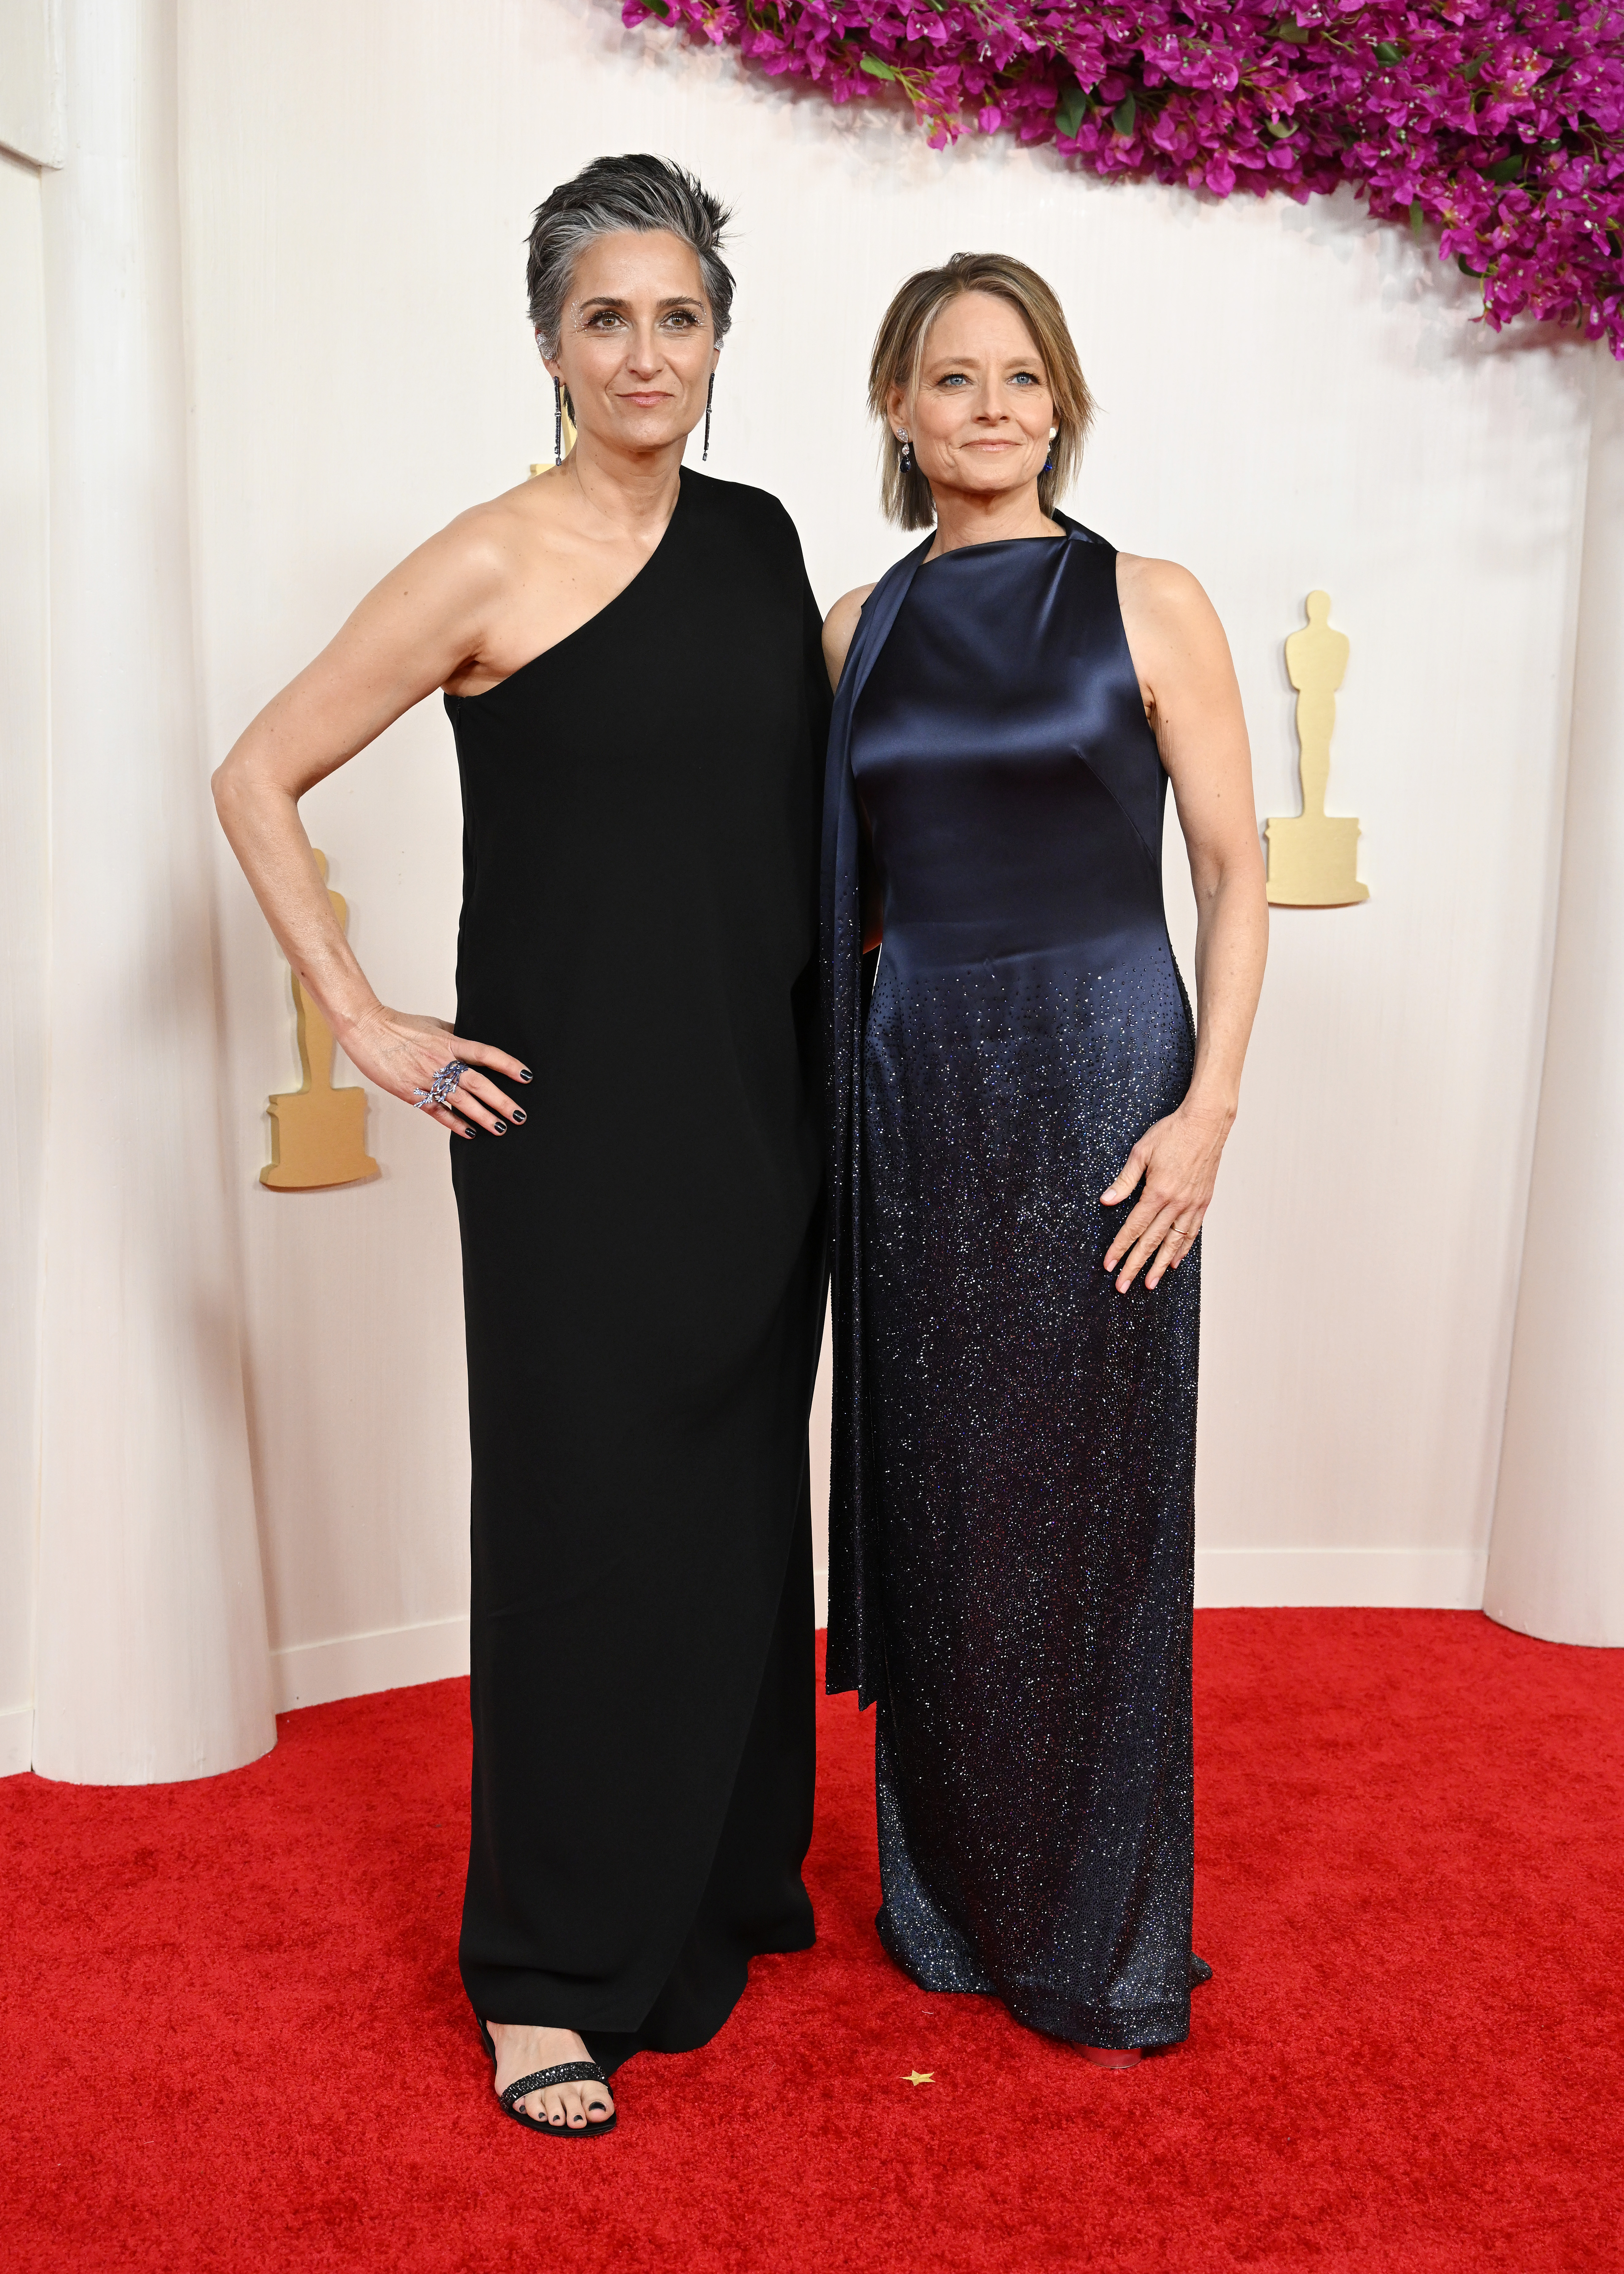 She was nominated and attended the Oscars with her wife Alexandra Hedison